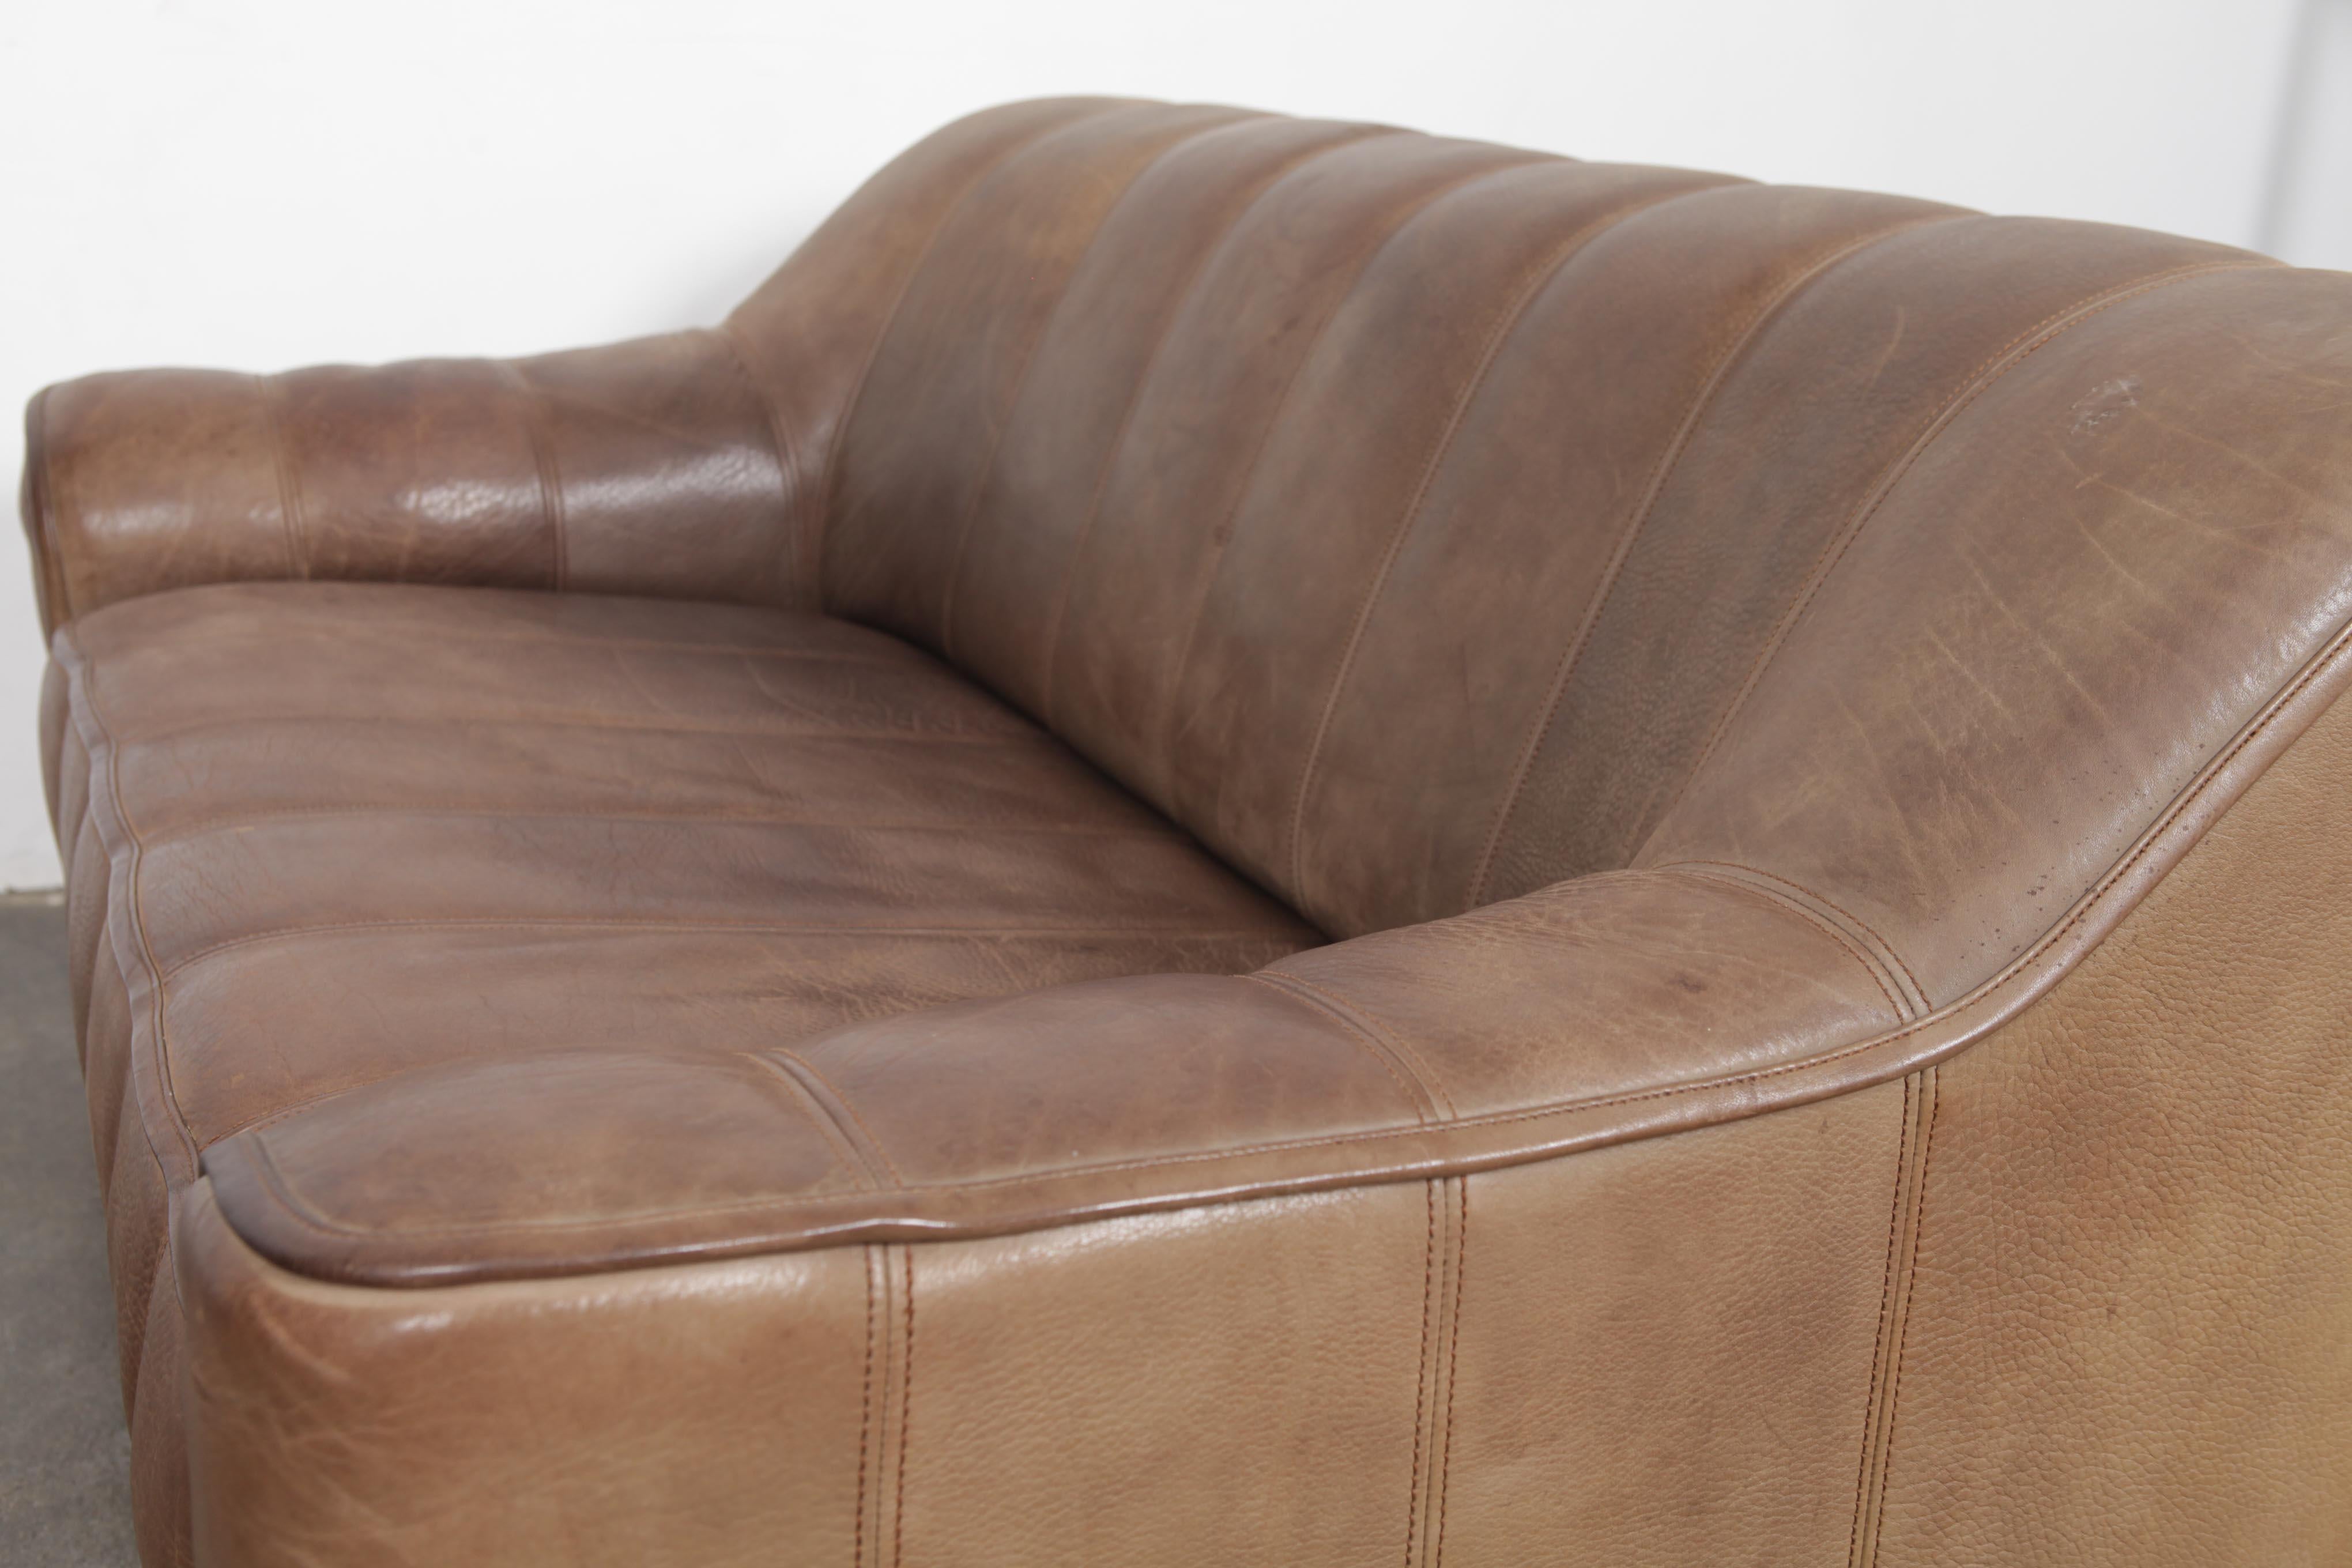 De Sede DS 44 2-Seat Sofa in Buffalo Leather, Switzerland, 1970s For Sale 10